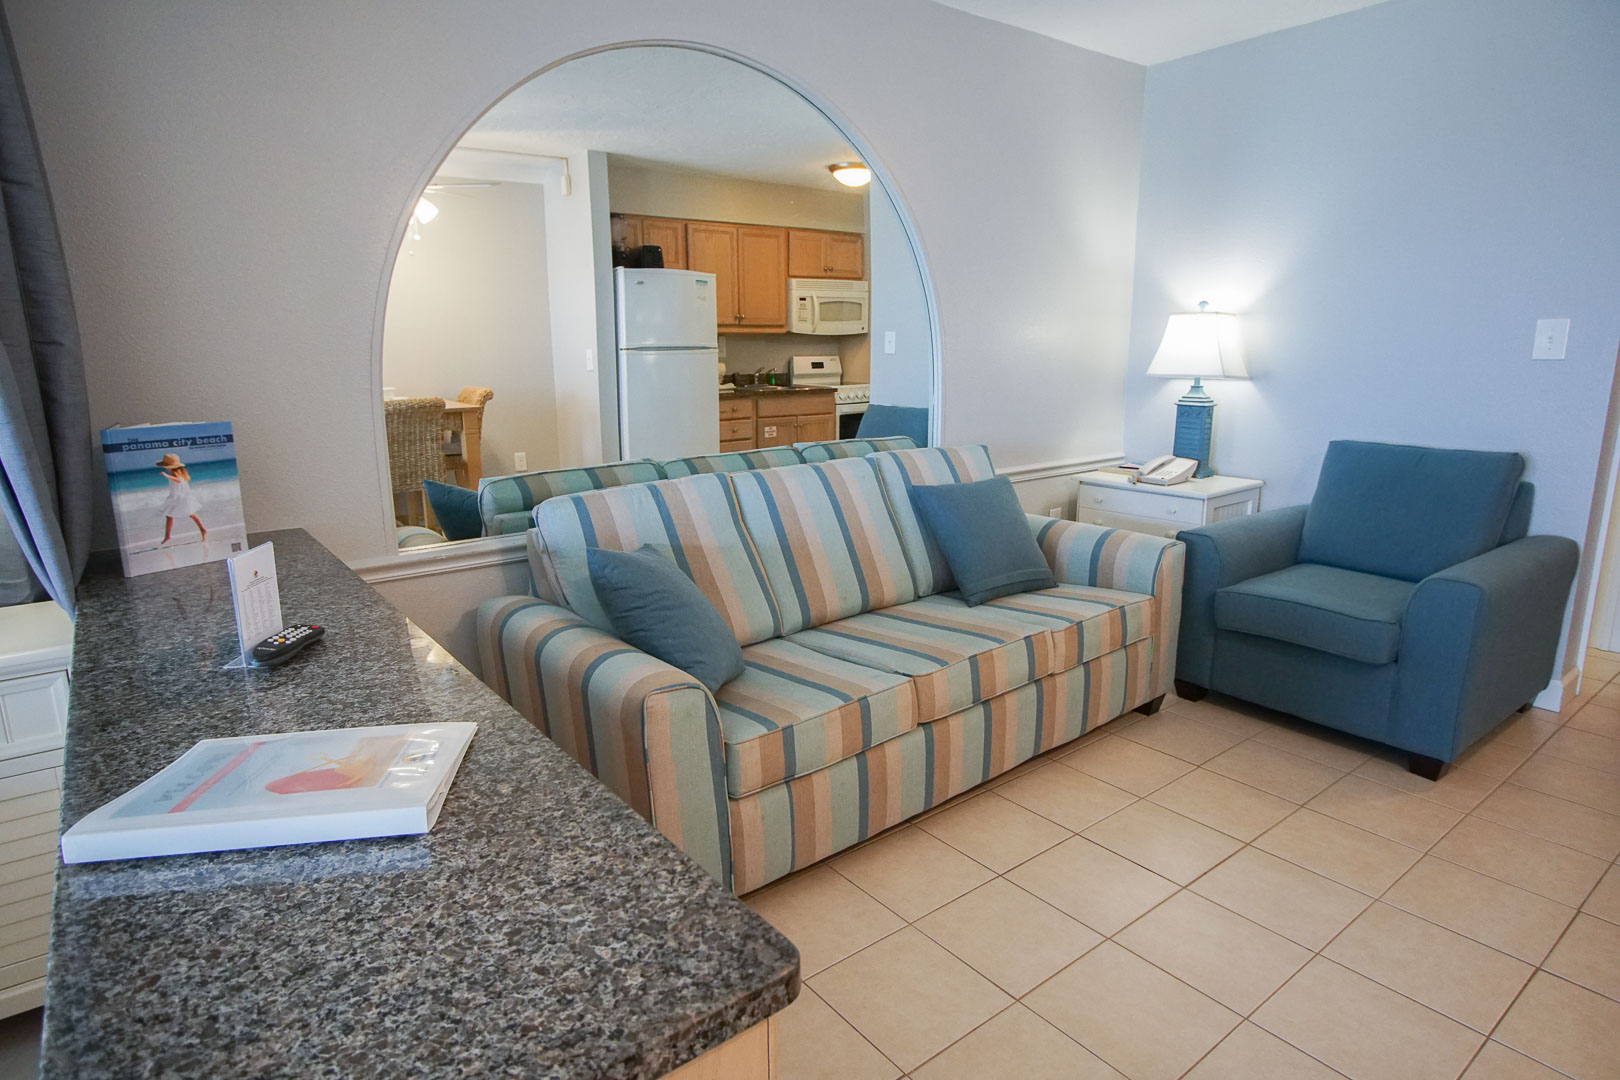 A cozy studio unit with a living room area at VRI's Panama City Resort & Club in Florida.